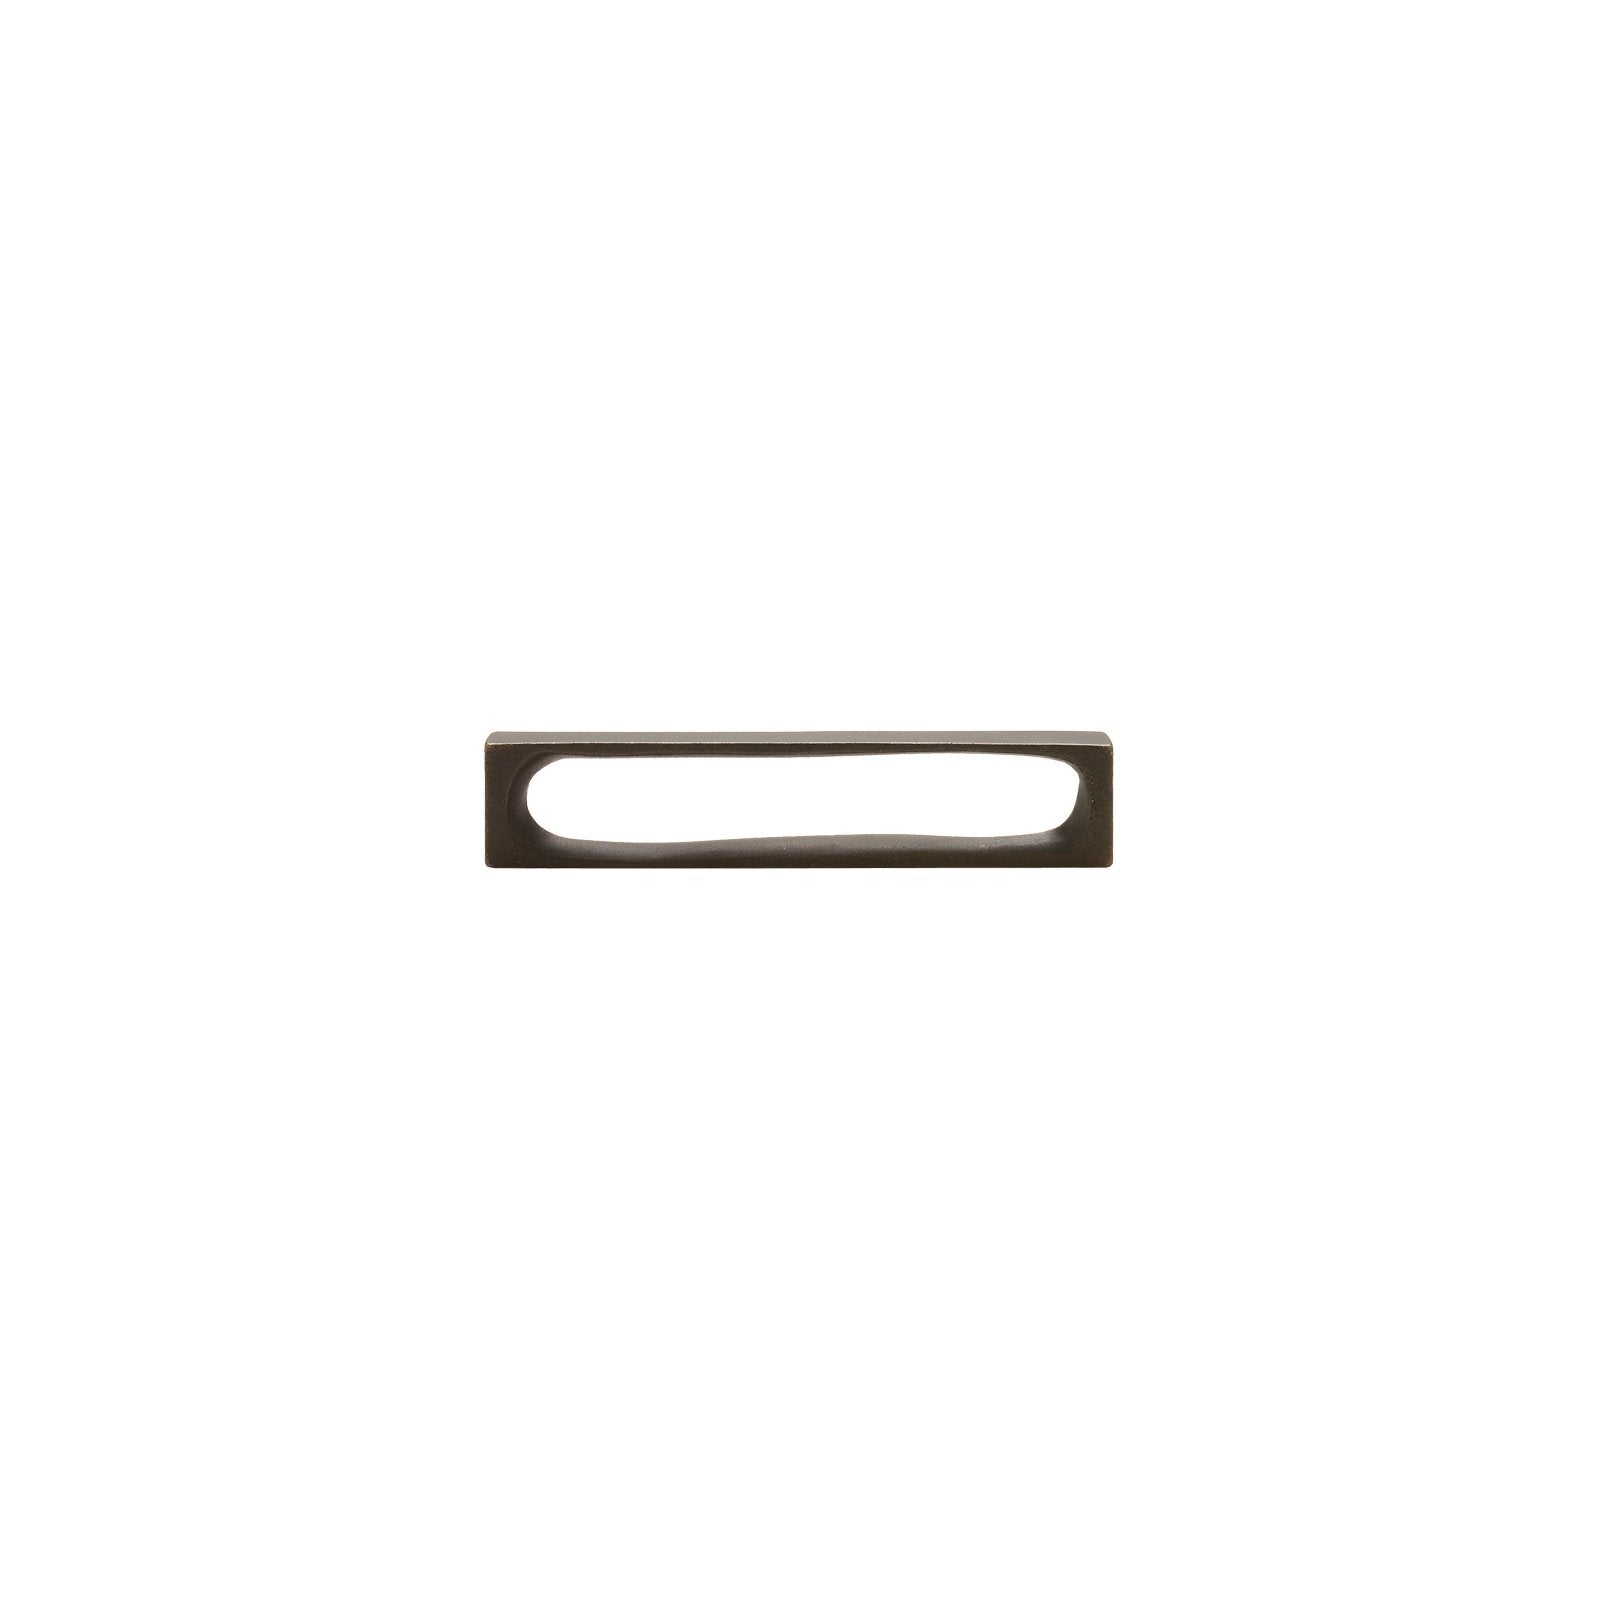 Rocky Mountain Hardware CK272 - 11 3/8" C-to-C Organic Square Cabinet Pull